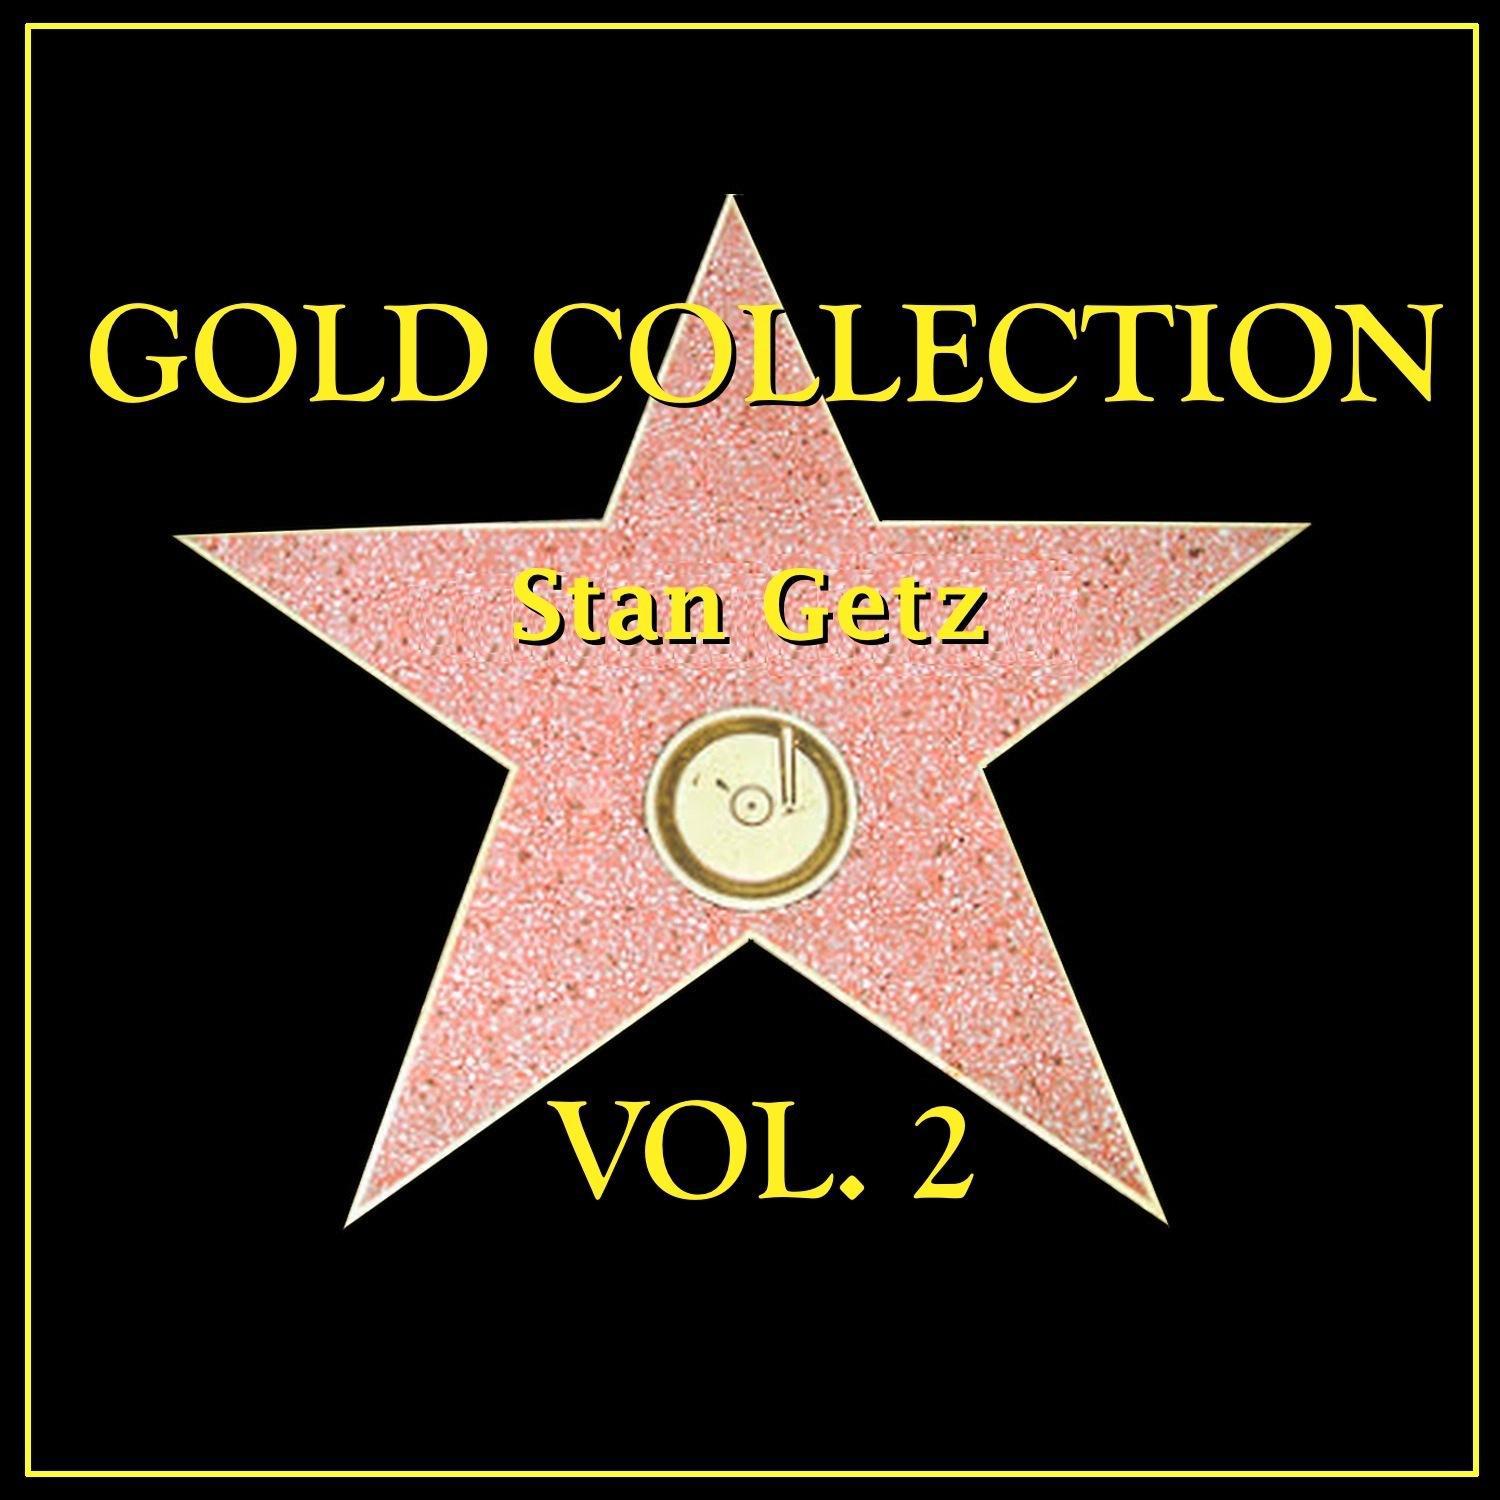 Gold Collection Vol. II